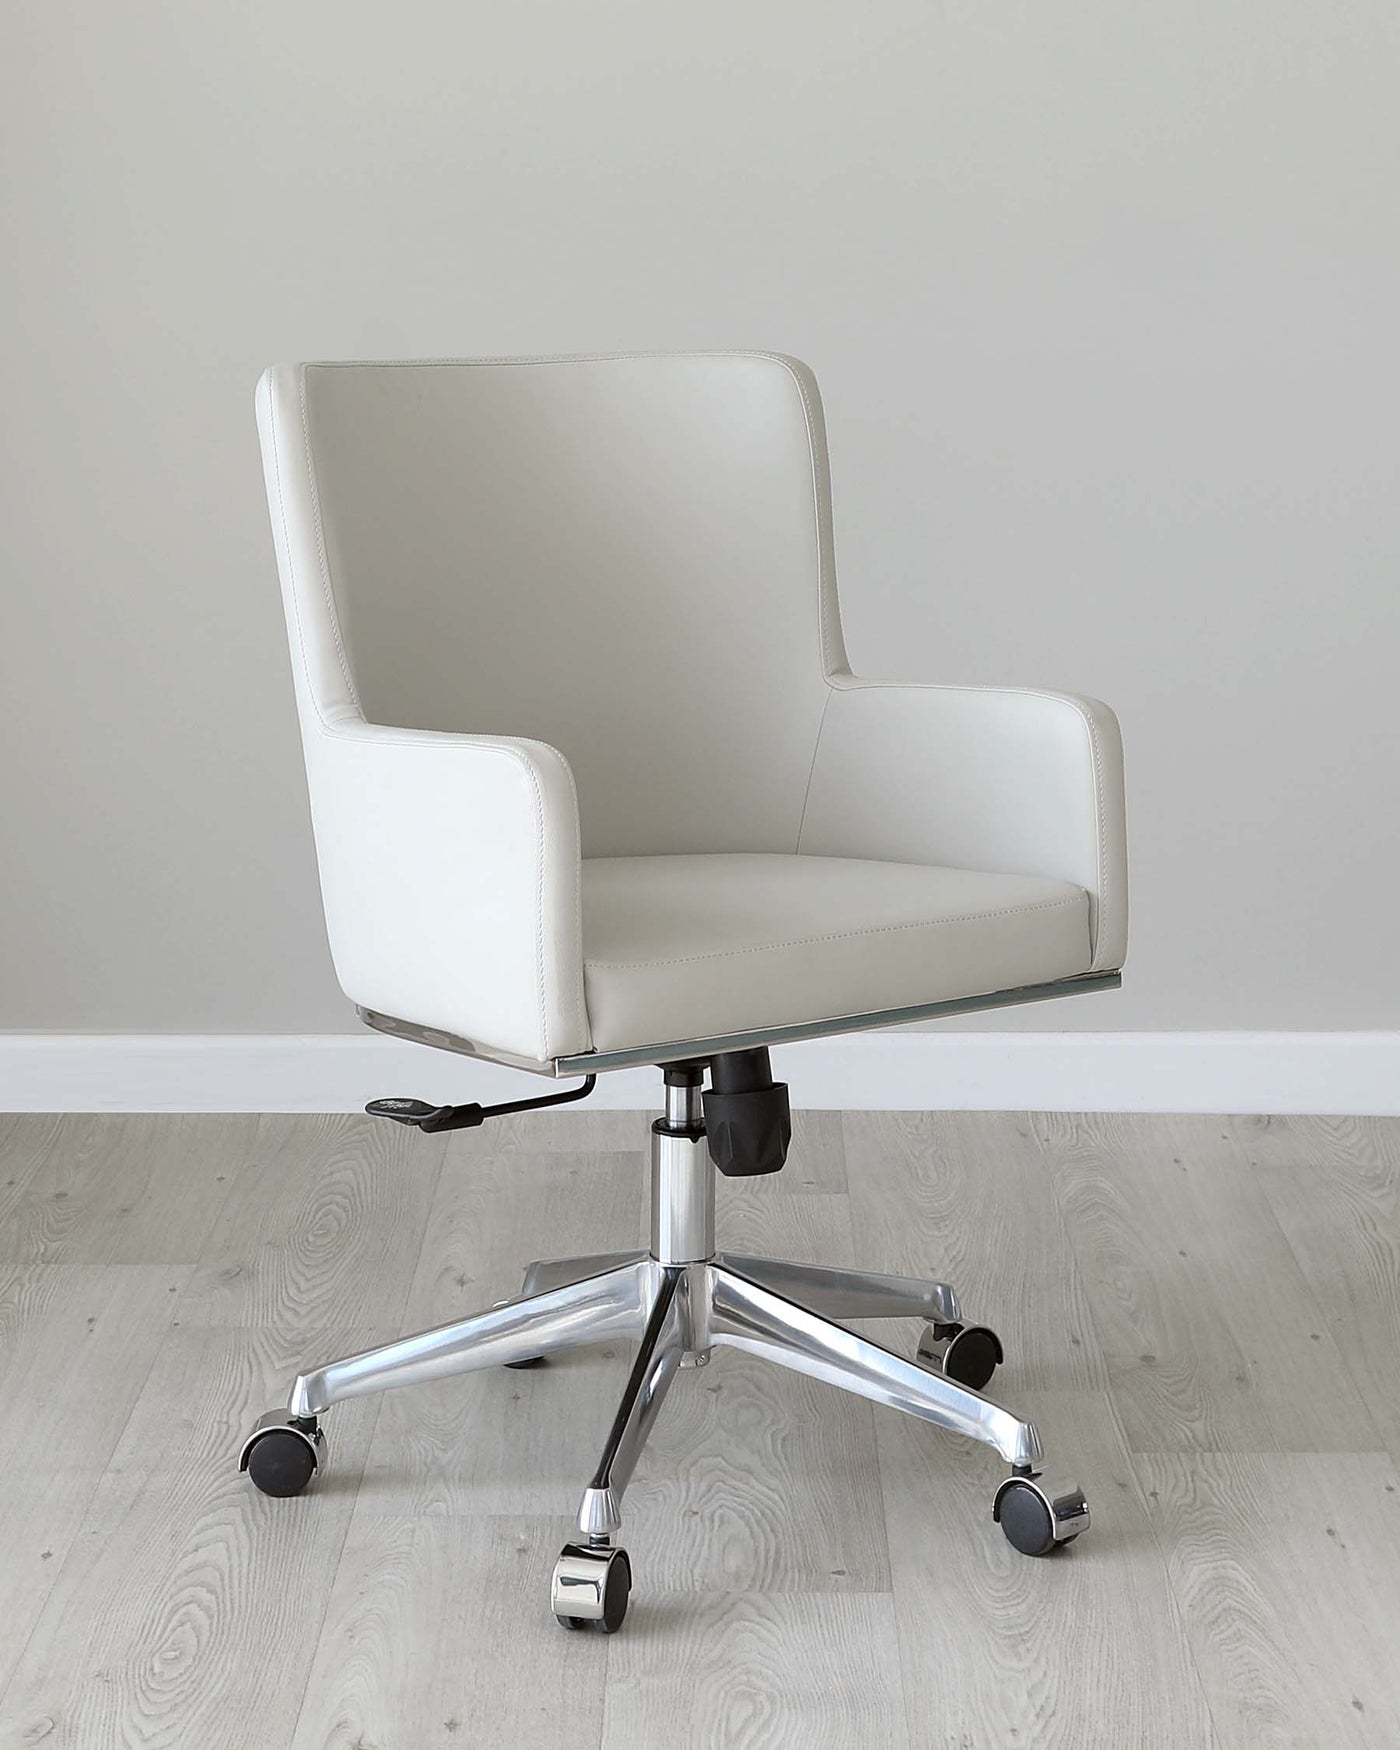 Modern white office chair with a high back, armrests, and chrome swivel base with casters.